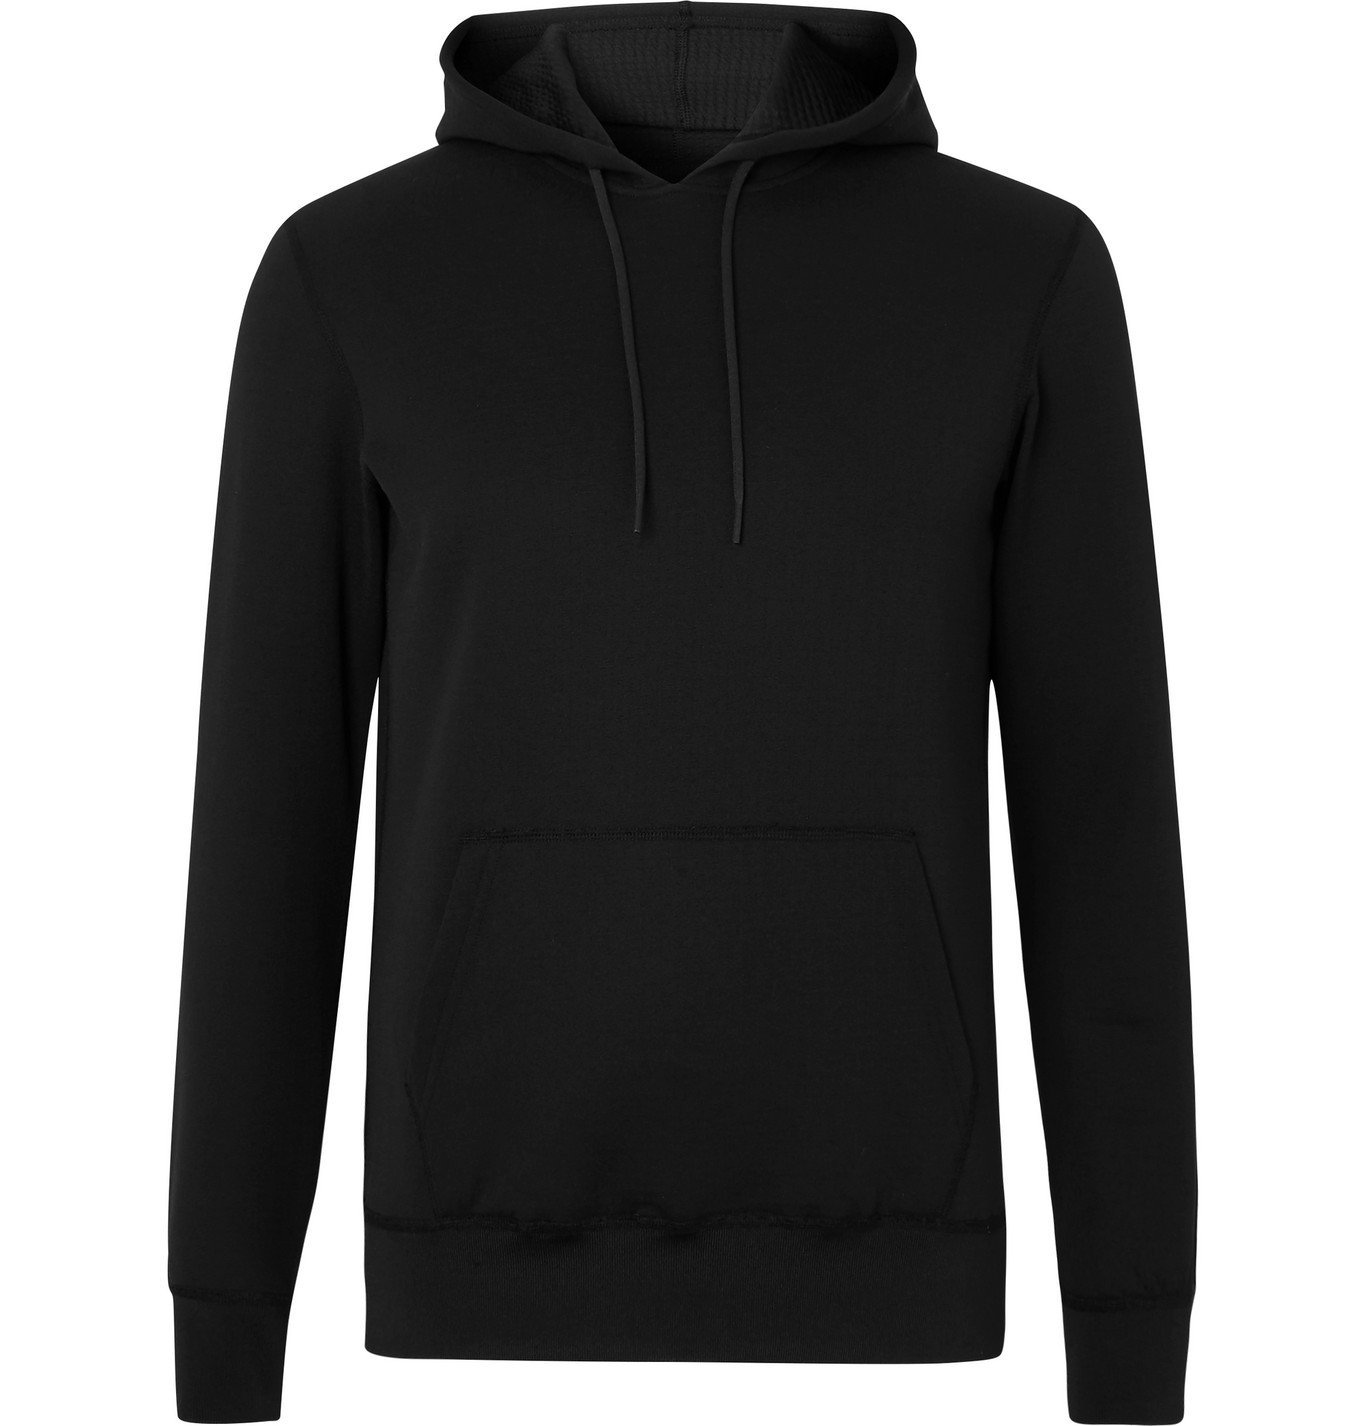 Reigning Champ - Quilted Polartec Power Air Hoodie - Black 